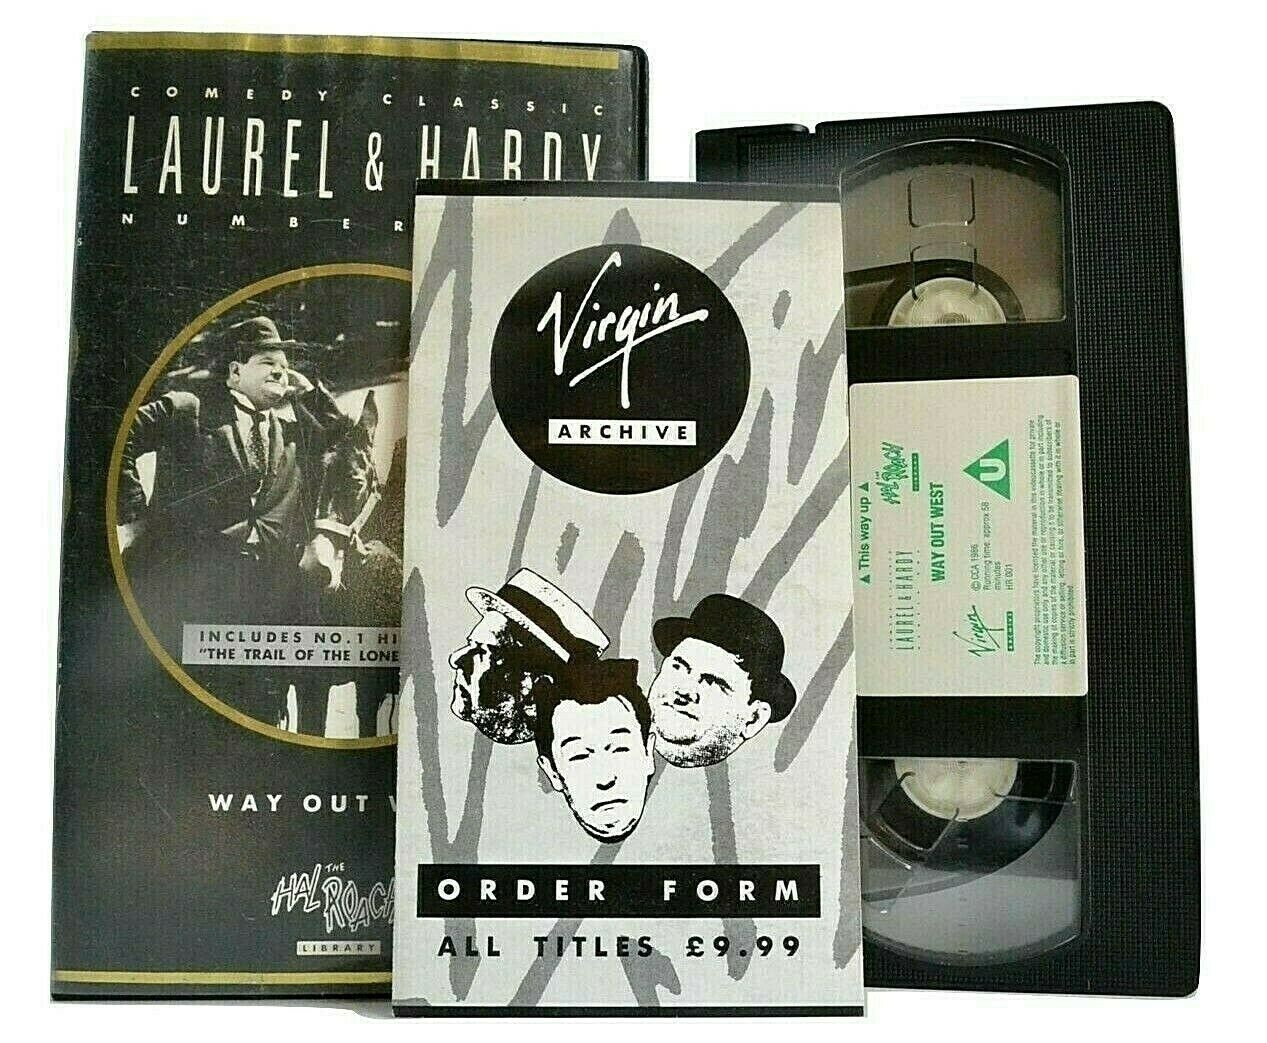 Laurel And Hardy: Way Out West (1937) - Comedy Classic - Black And White - VHS-